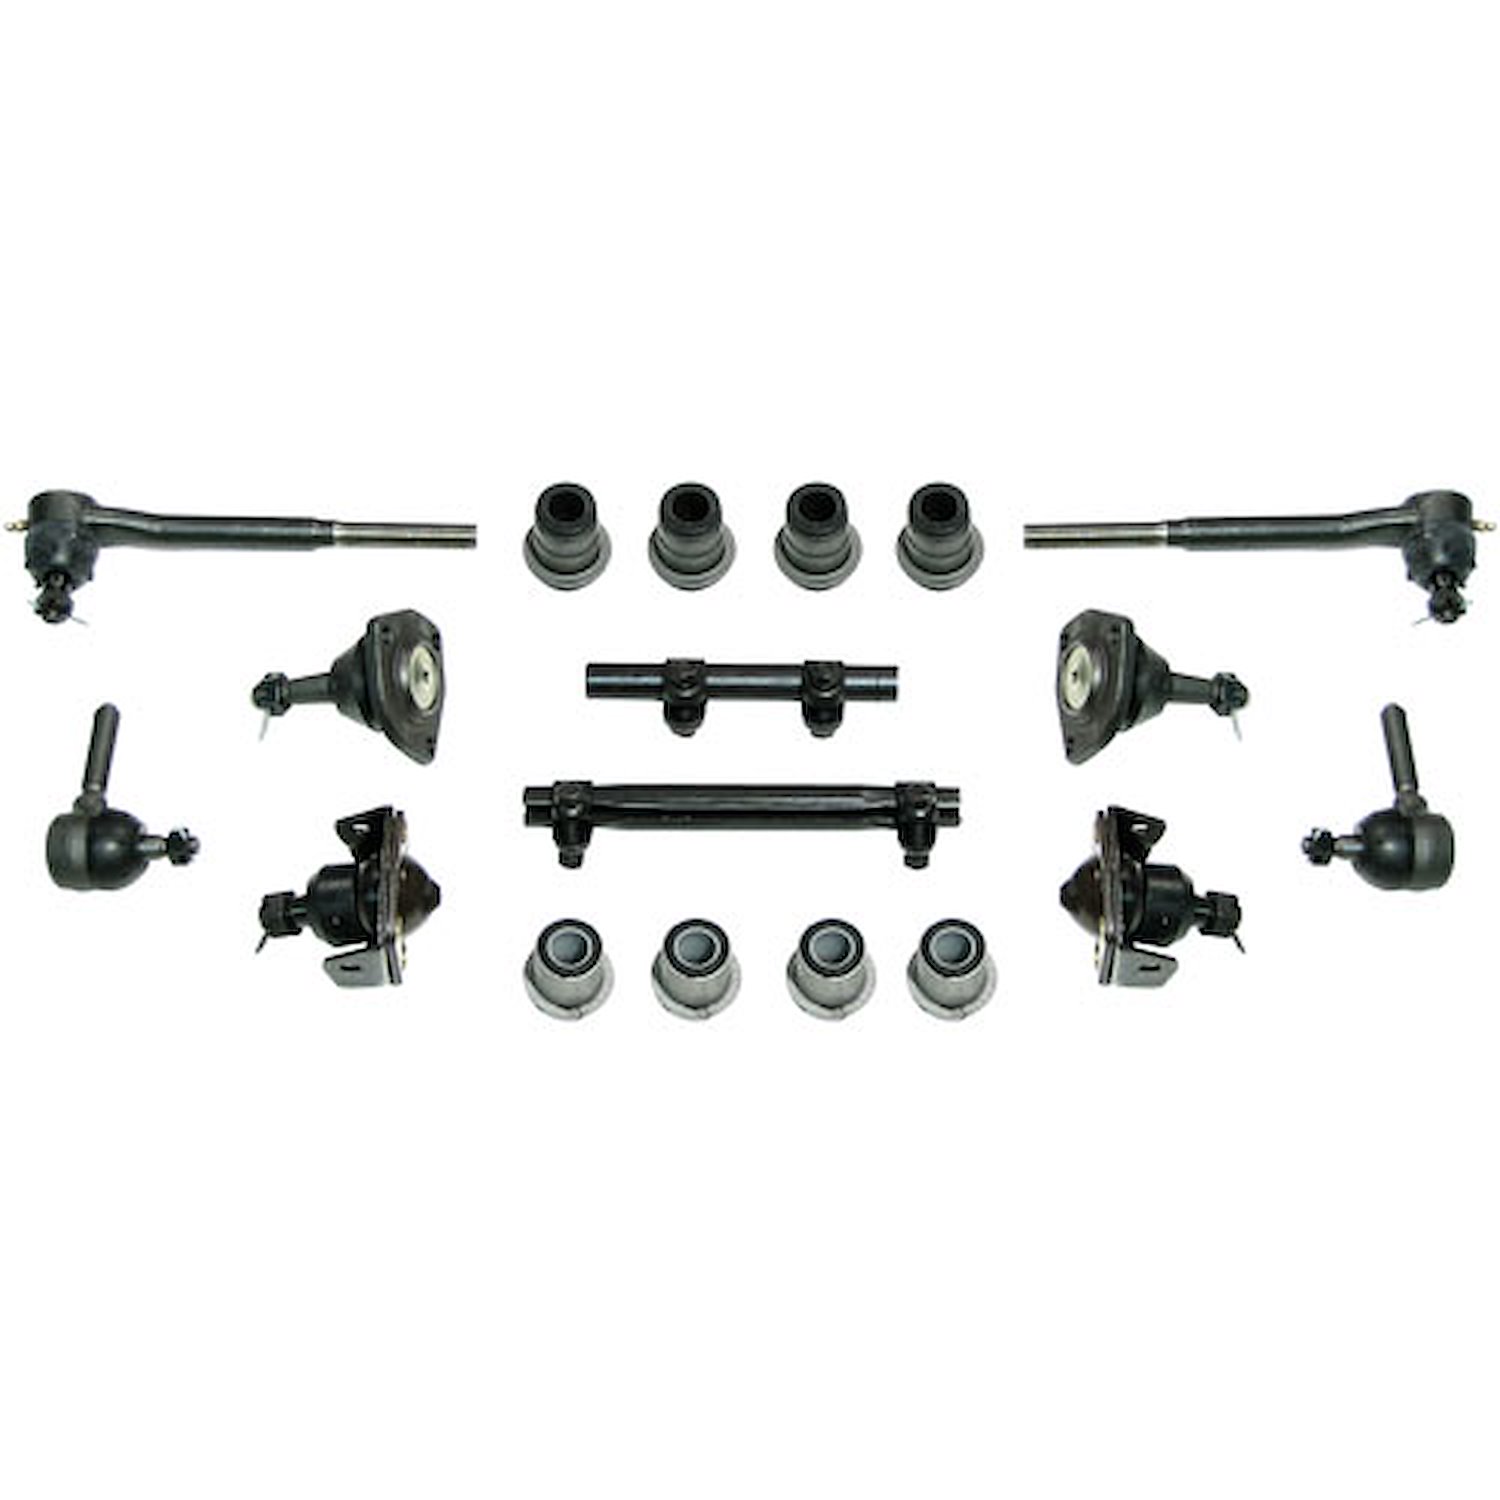 55-57 Full Size Chevy Suspension Kit Manual Steering